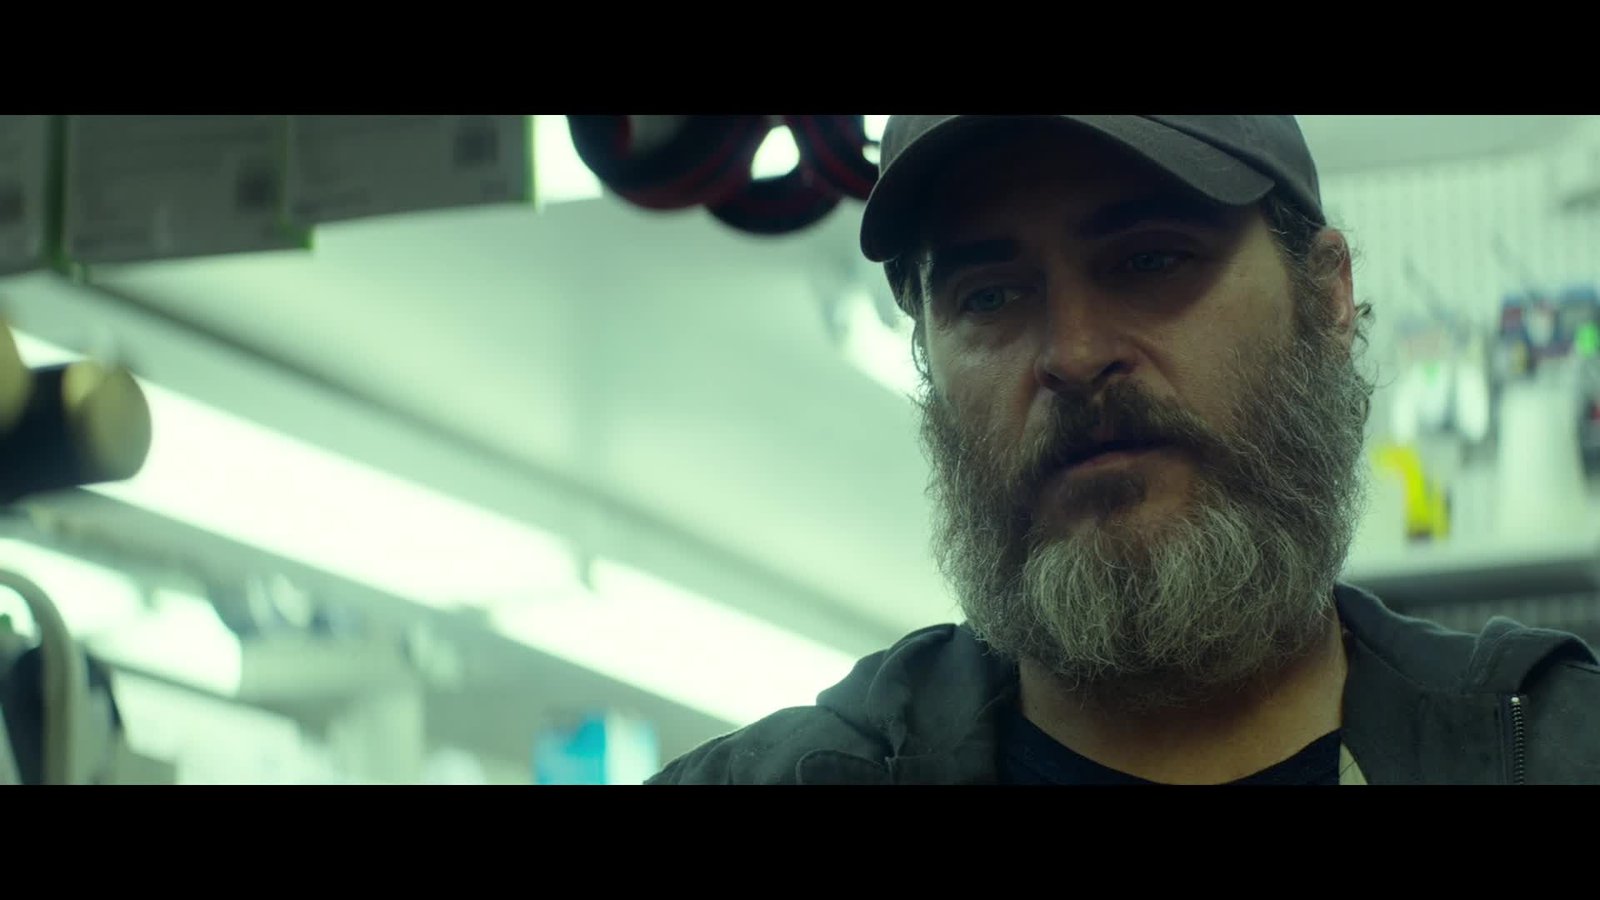 best movies on amazon prime: You Were Never Really Here (2017)